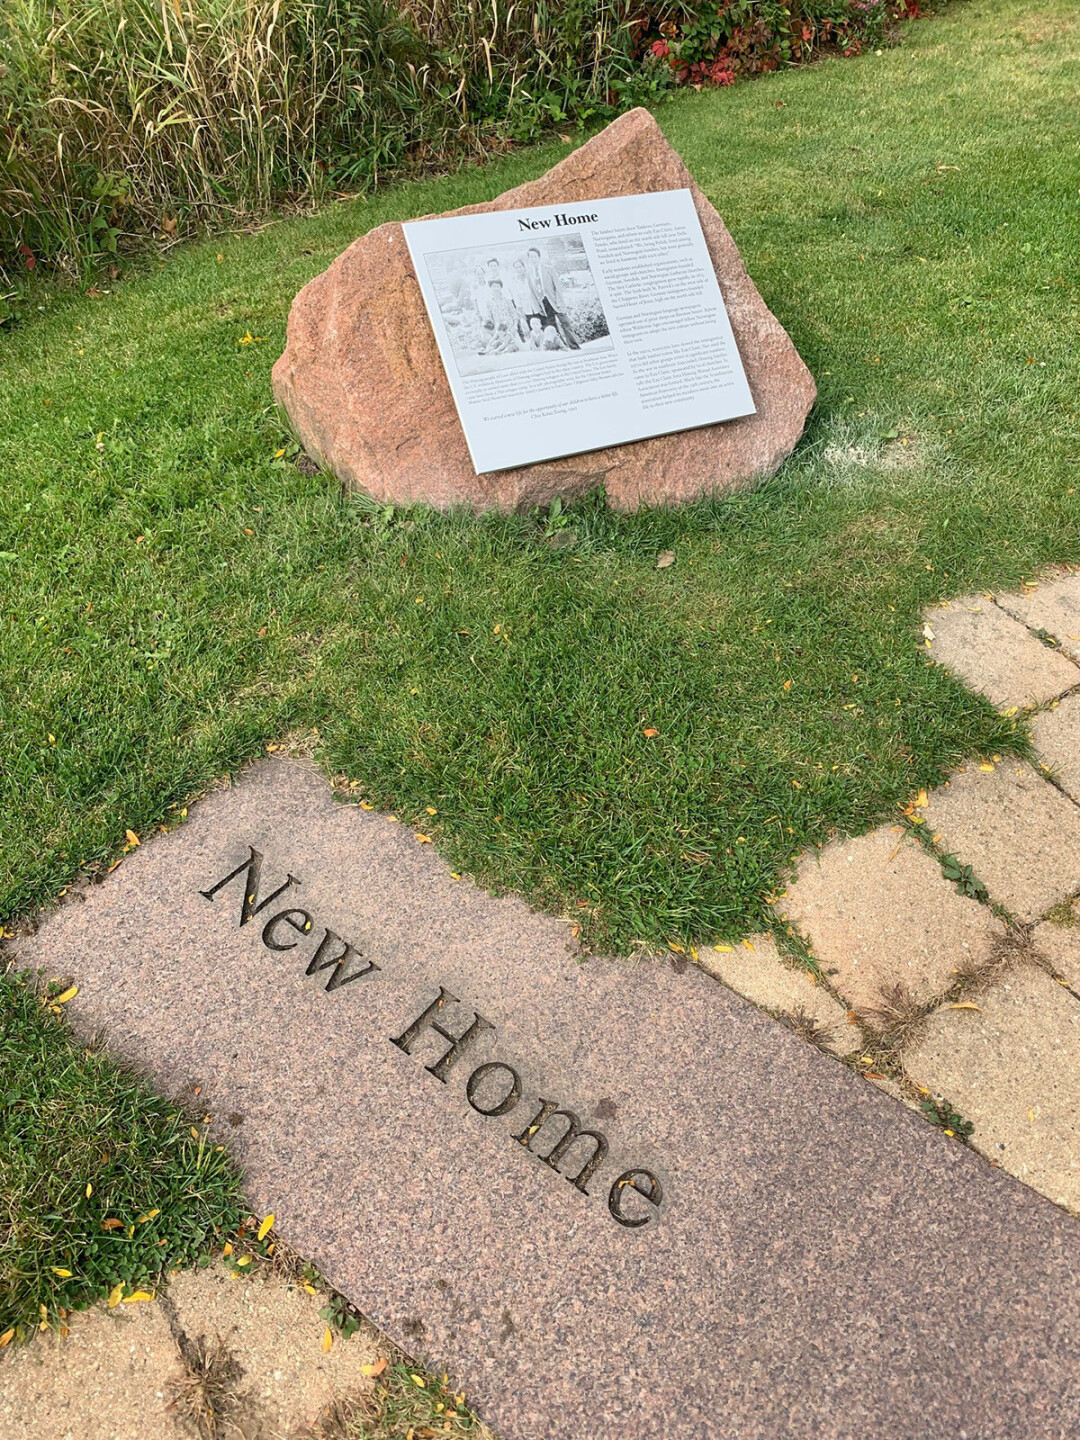 HISTORY ROCKS. The newly installed plaques in Phoenix Park describe aspects of Eau Claire's history – in this case, immigration to the area. (Submitted photo)  